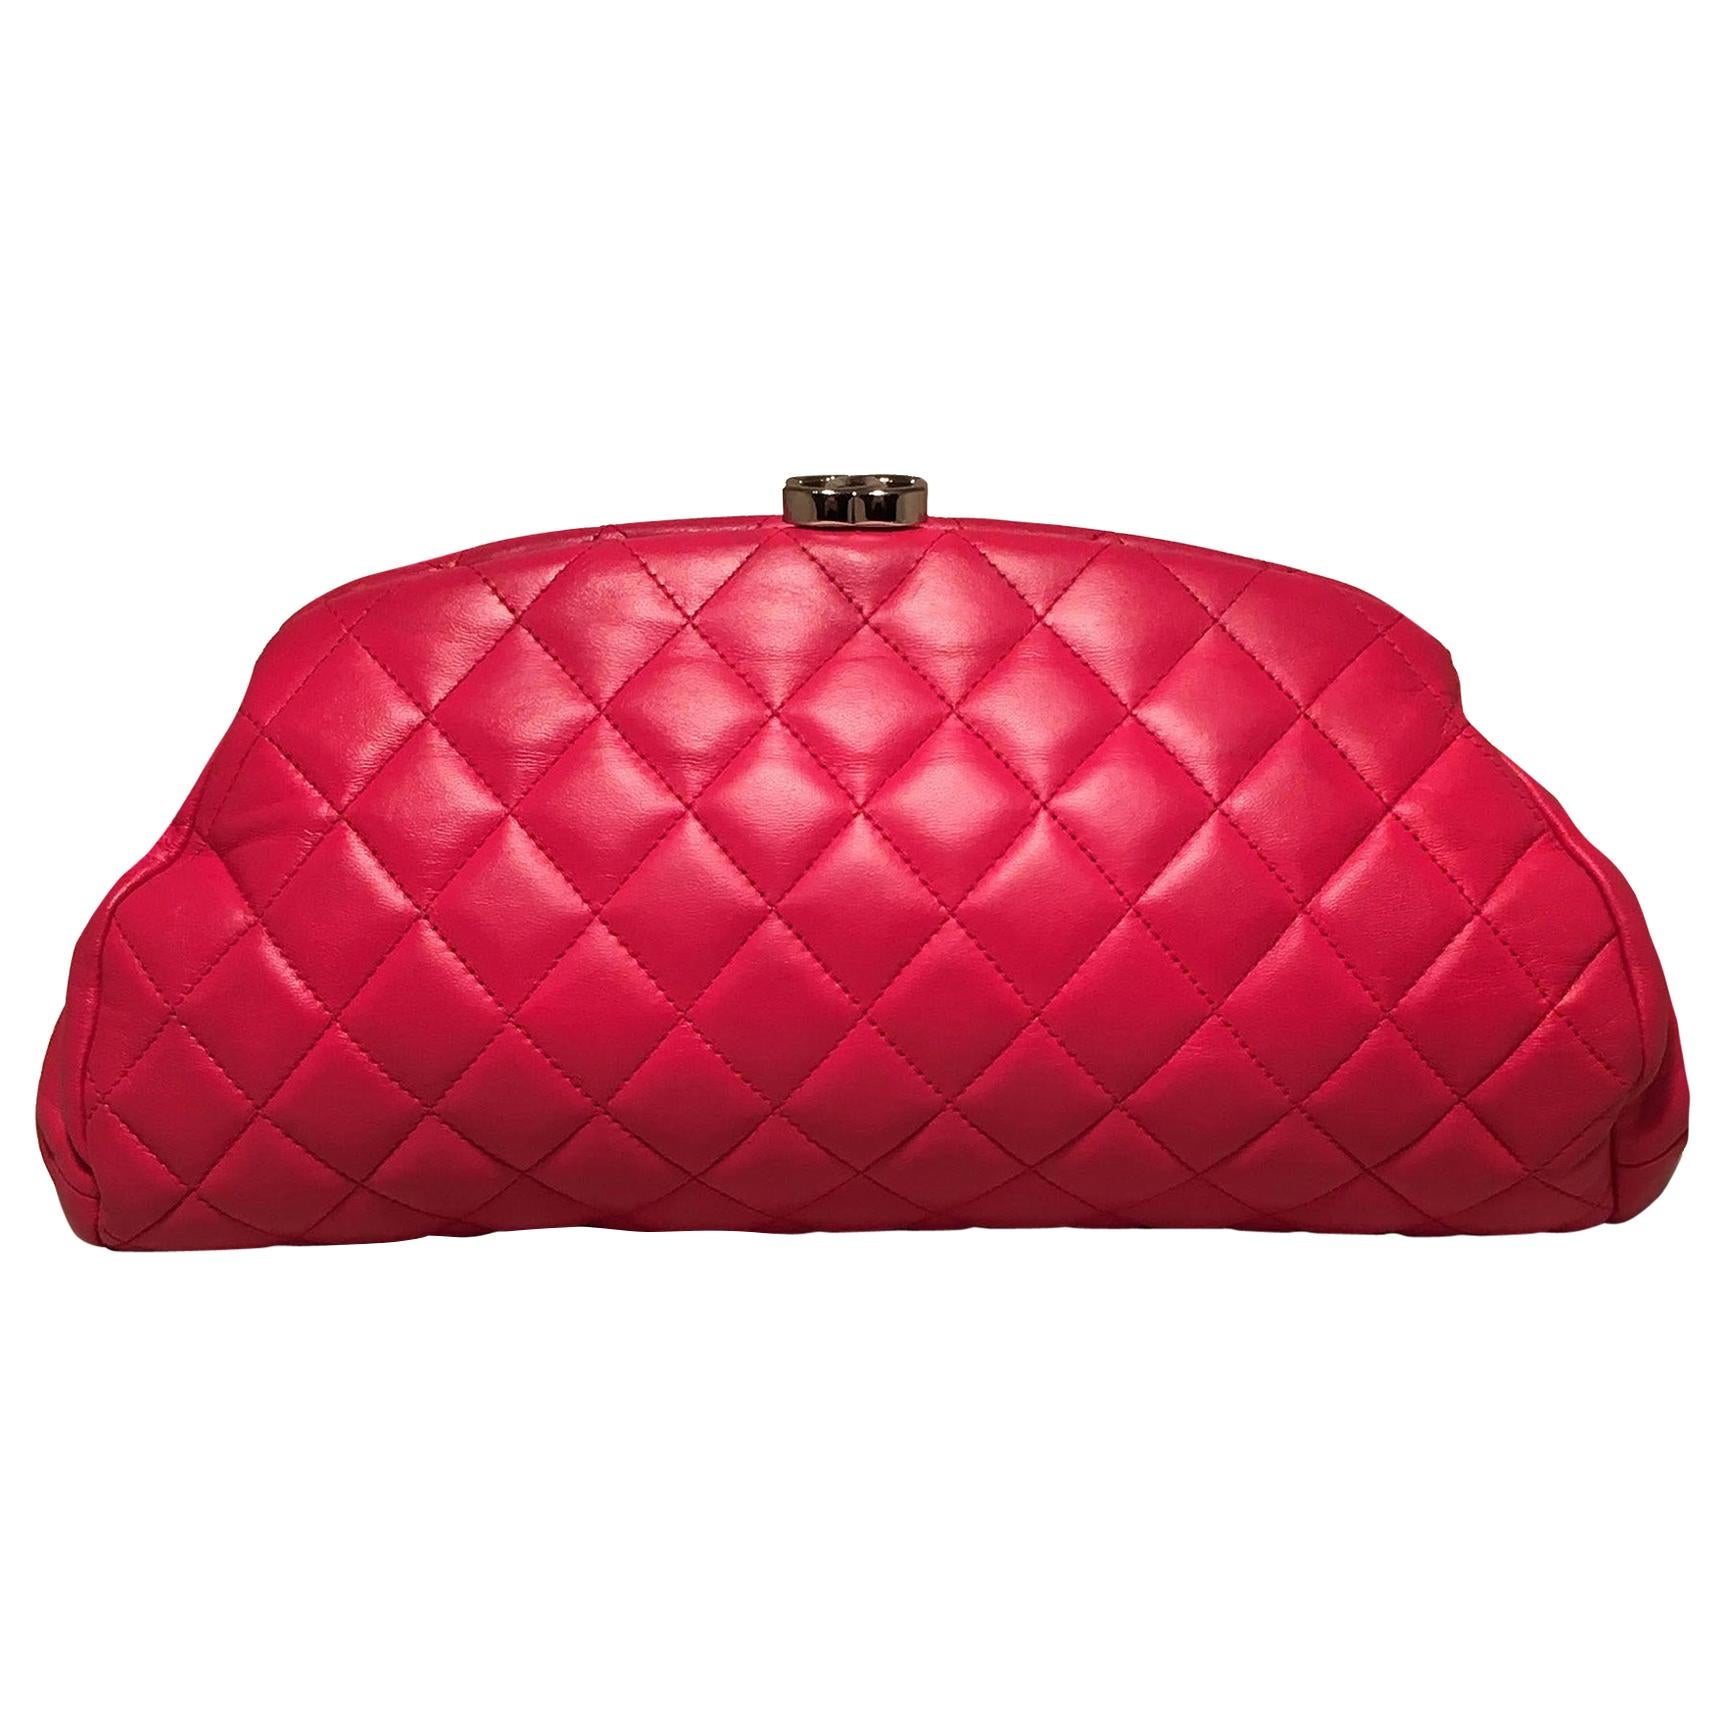 Chanel Dark Pink Quilted Leather Timeless Clutch 